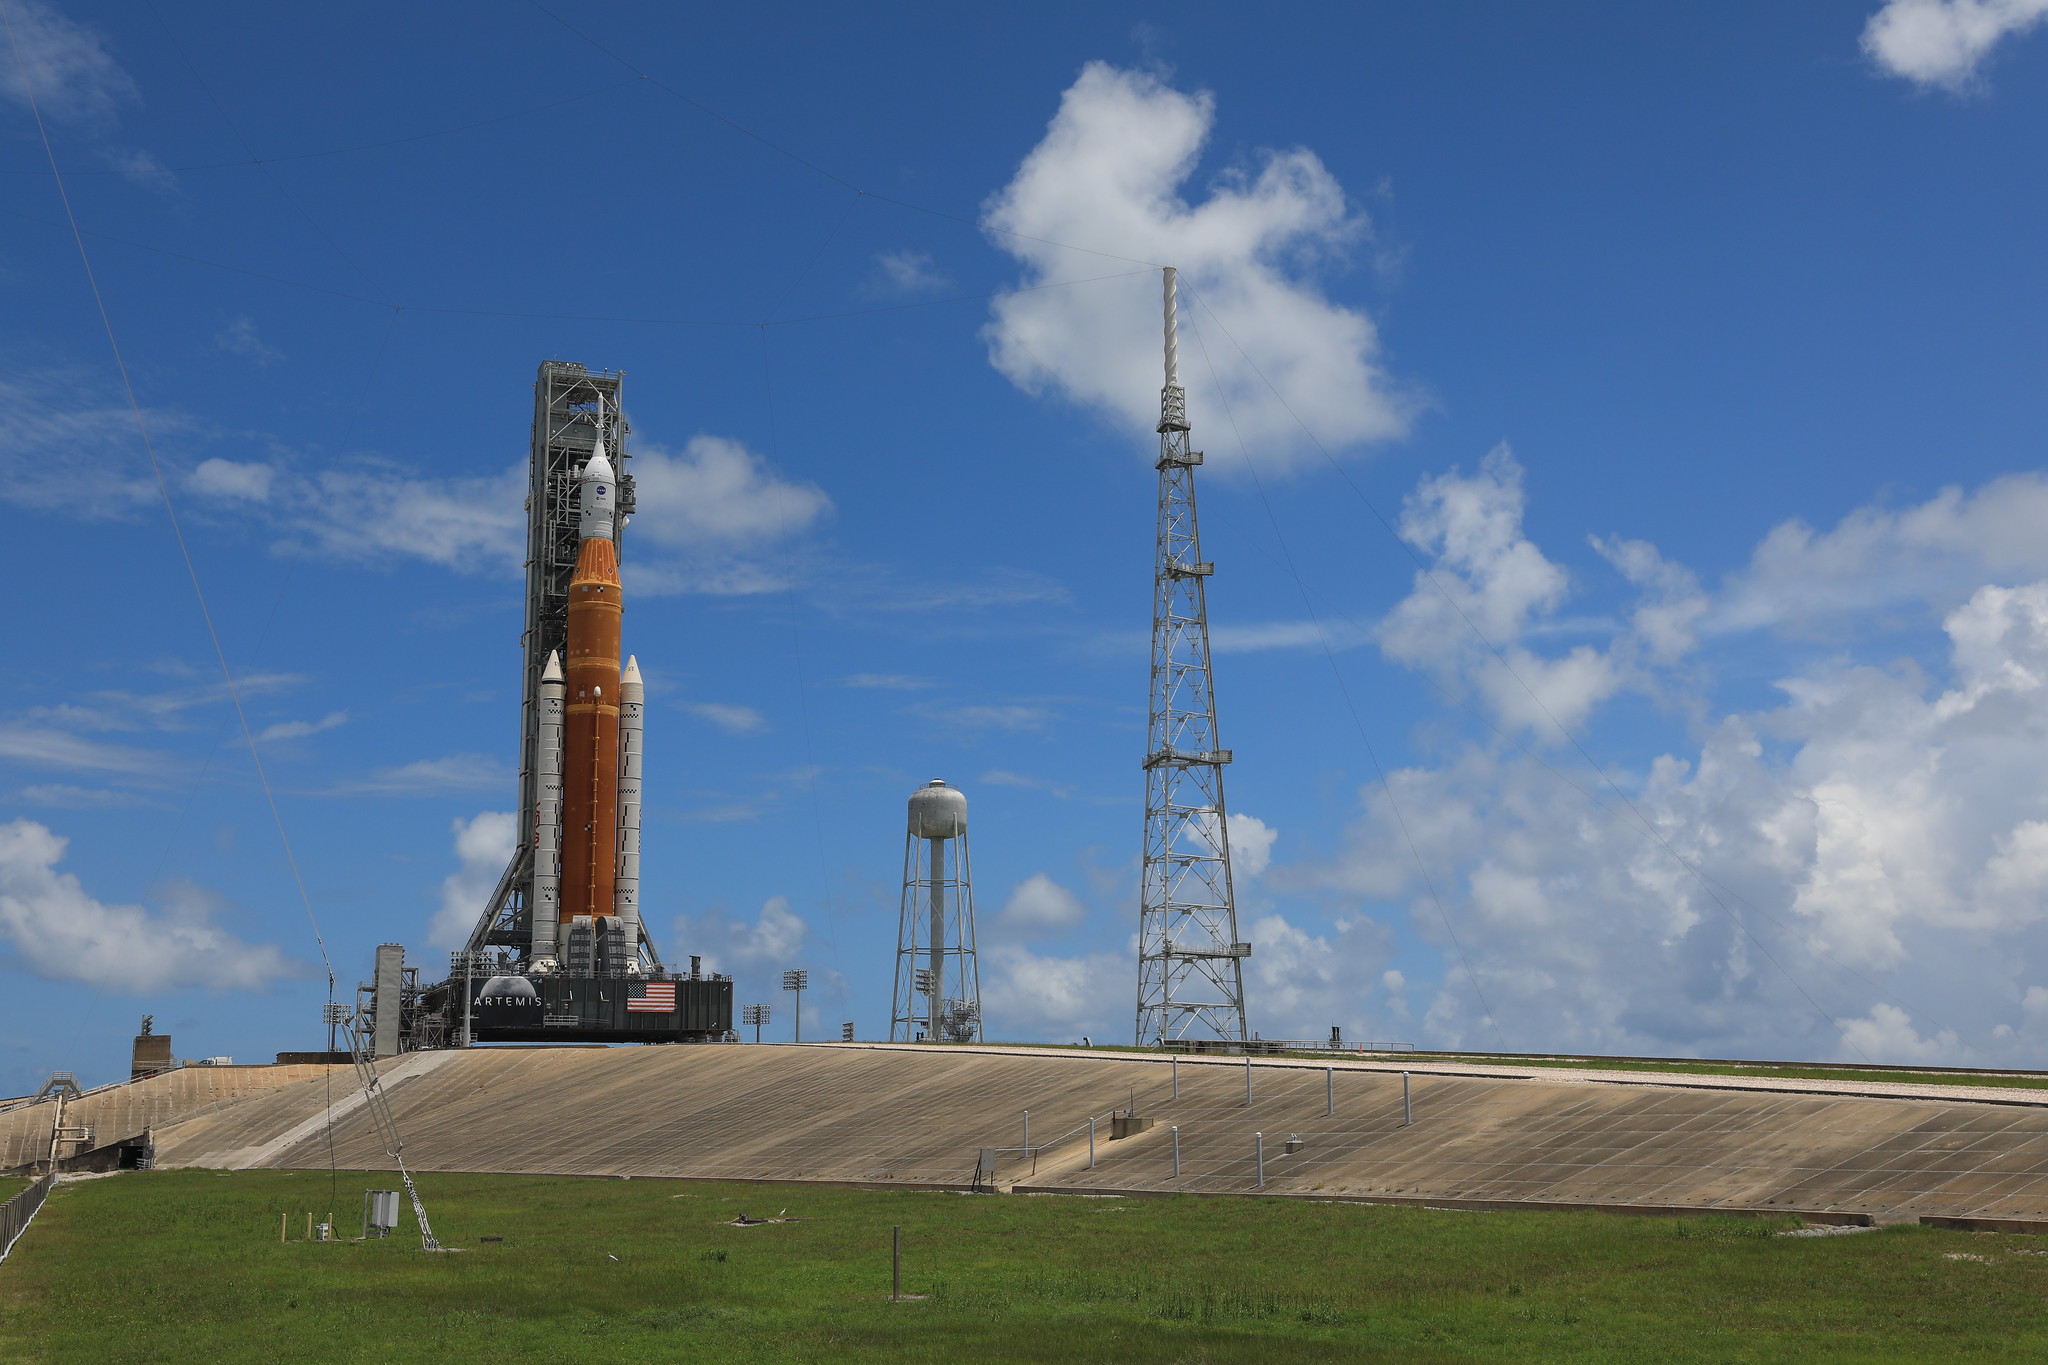 A brilliant blue sky serves as a backdrop for the Artemis I Space Launch System (SLS) and Orion spacecraft atop the mobile launcher at Launch Pad 39B at NASA’s Kennedy Space Center in Florida on June 30, 2022.